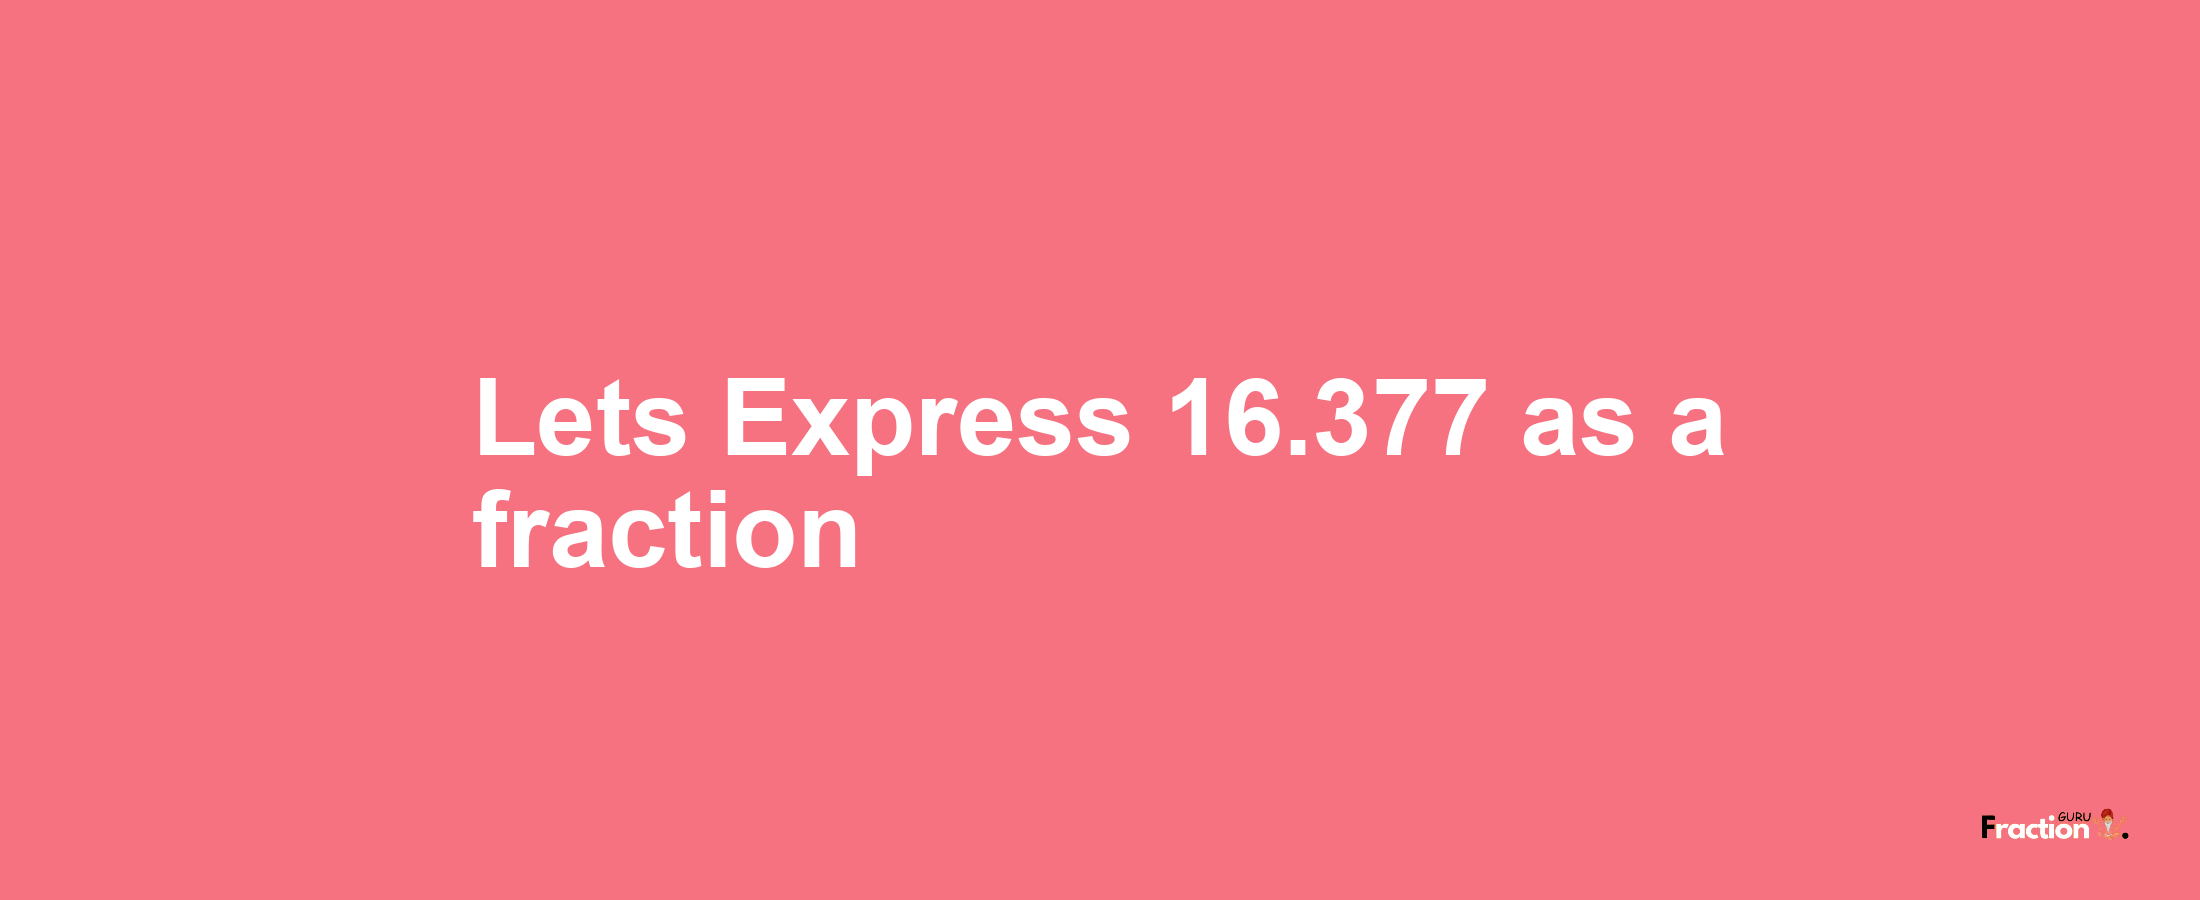 Lets Express 16.377 as afraction